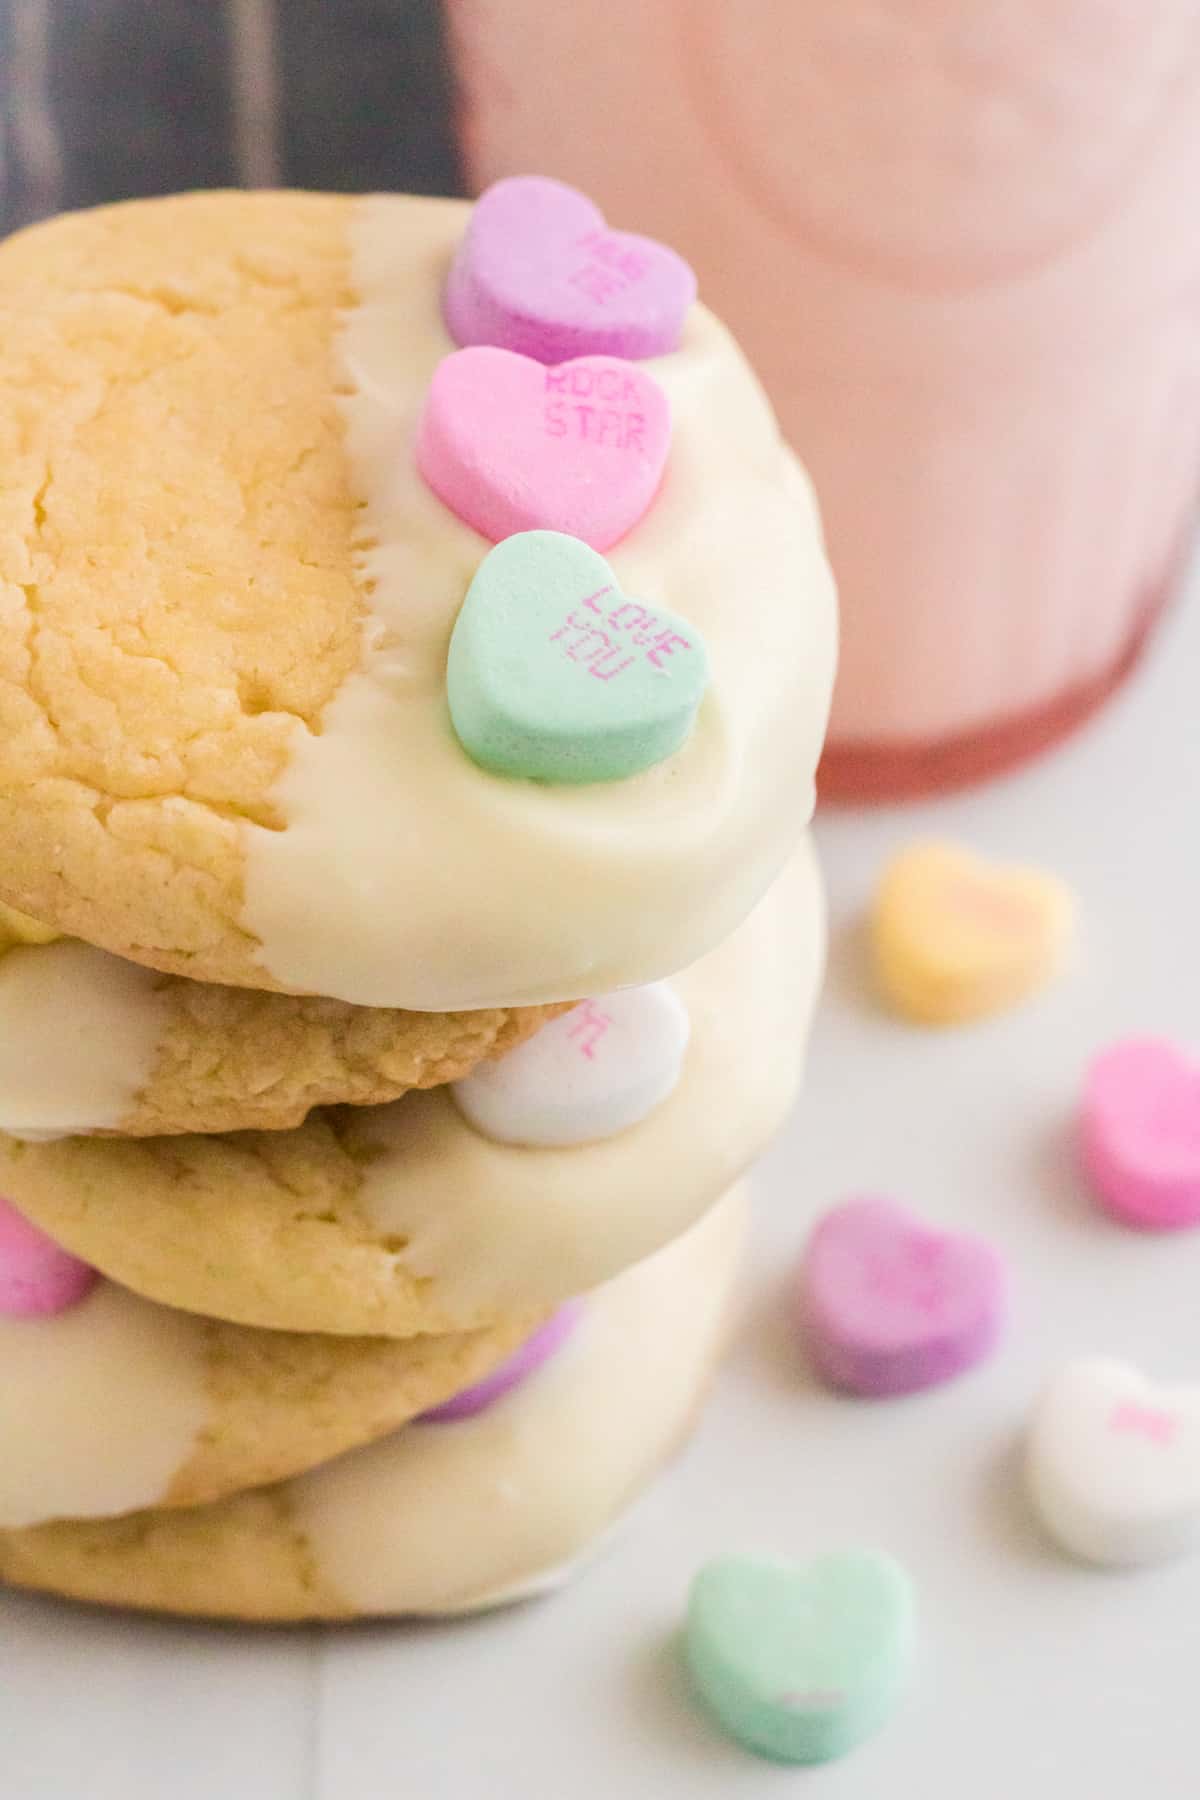 Five Valentines cake mix cookies with candy hearts stacked on top of one another with a glass of milk and more conversation heart candies around them.